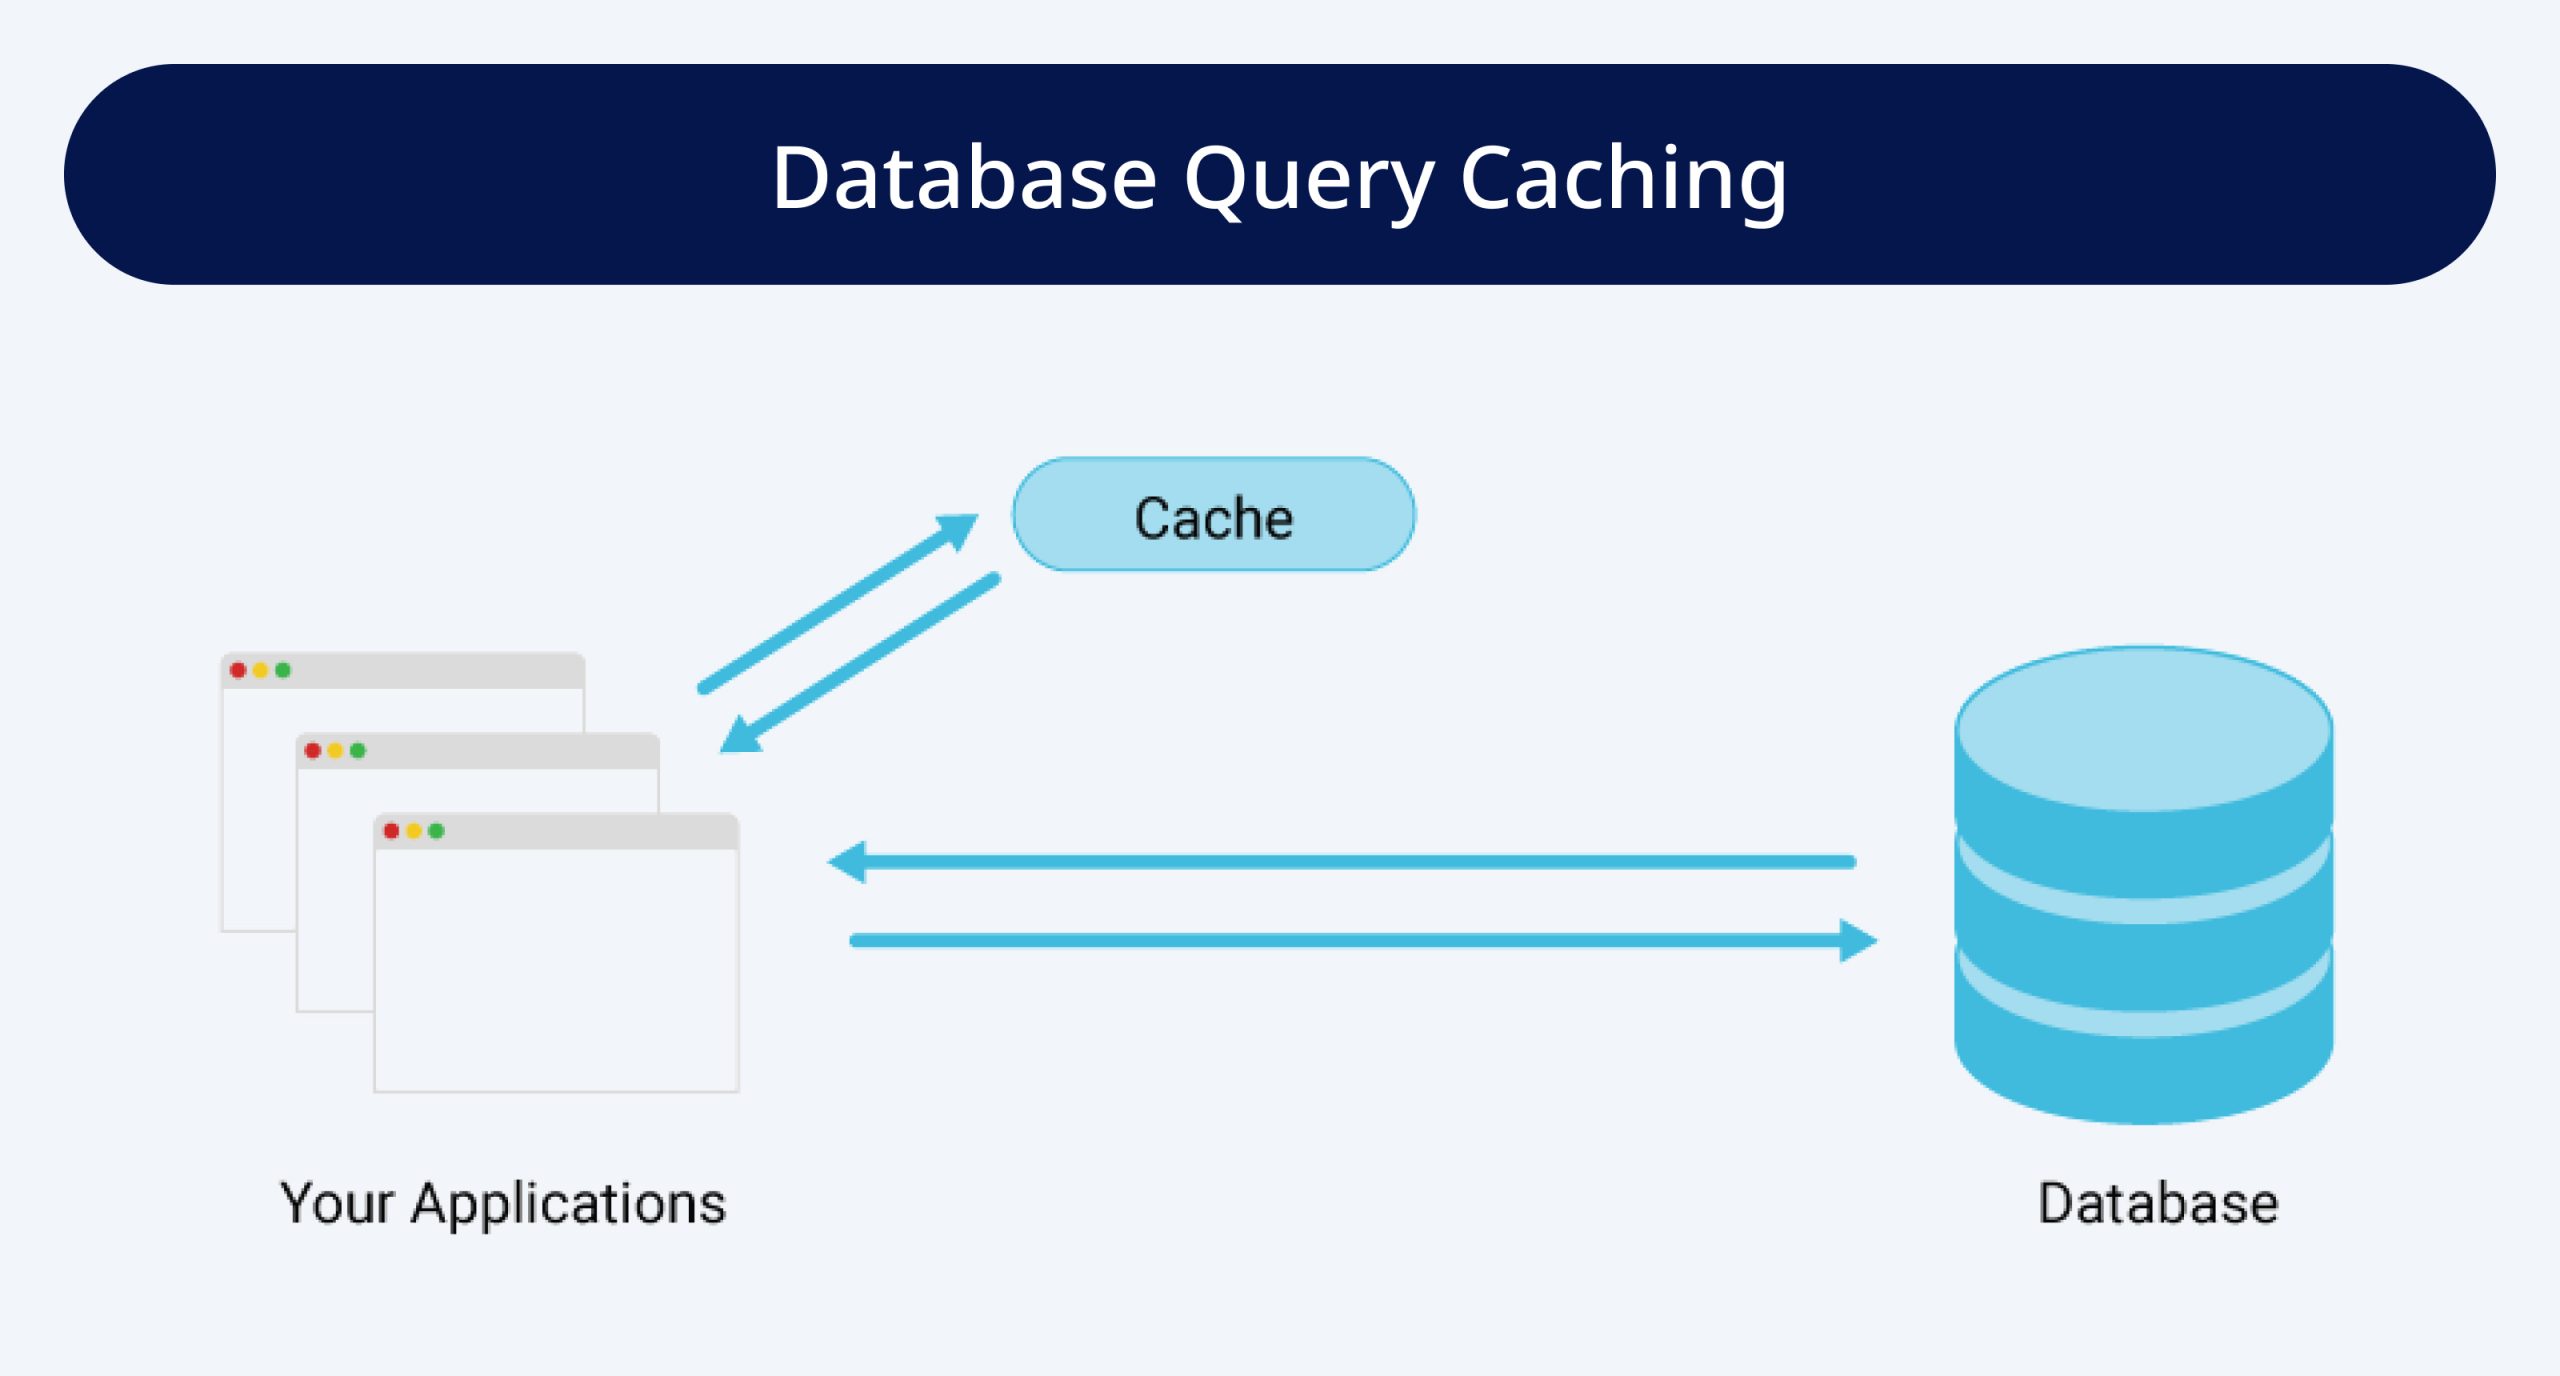 Database Query Caching